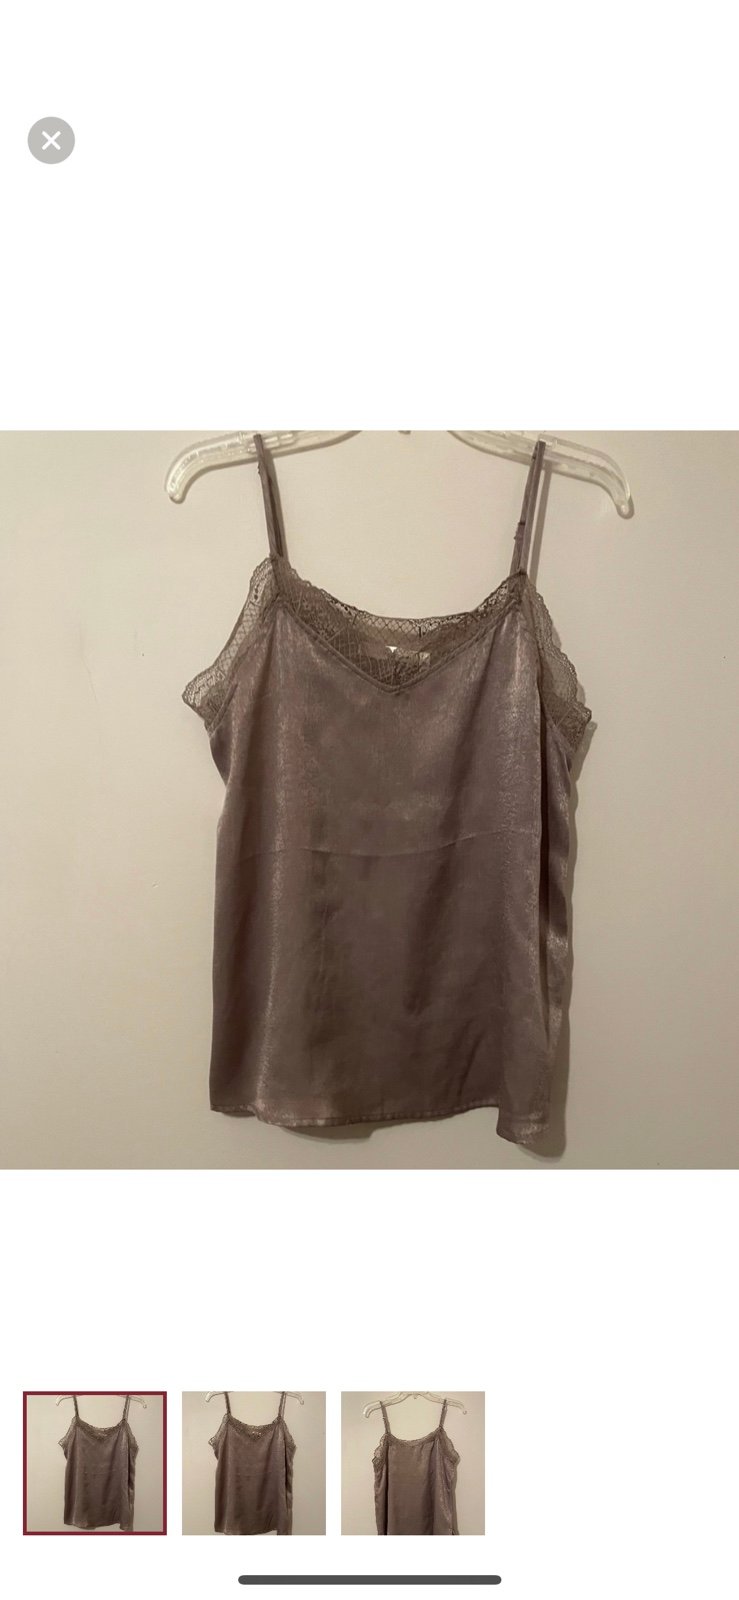 Comfortable 3/$15 André by Unit Top IBfmMeFun hot sale